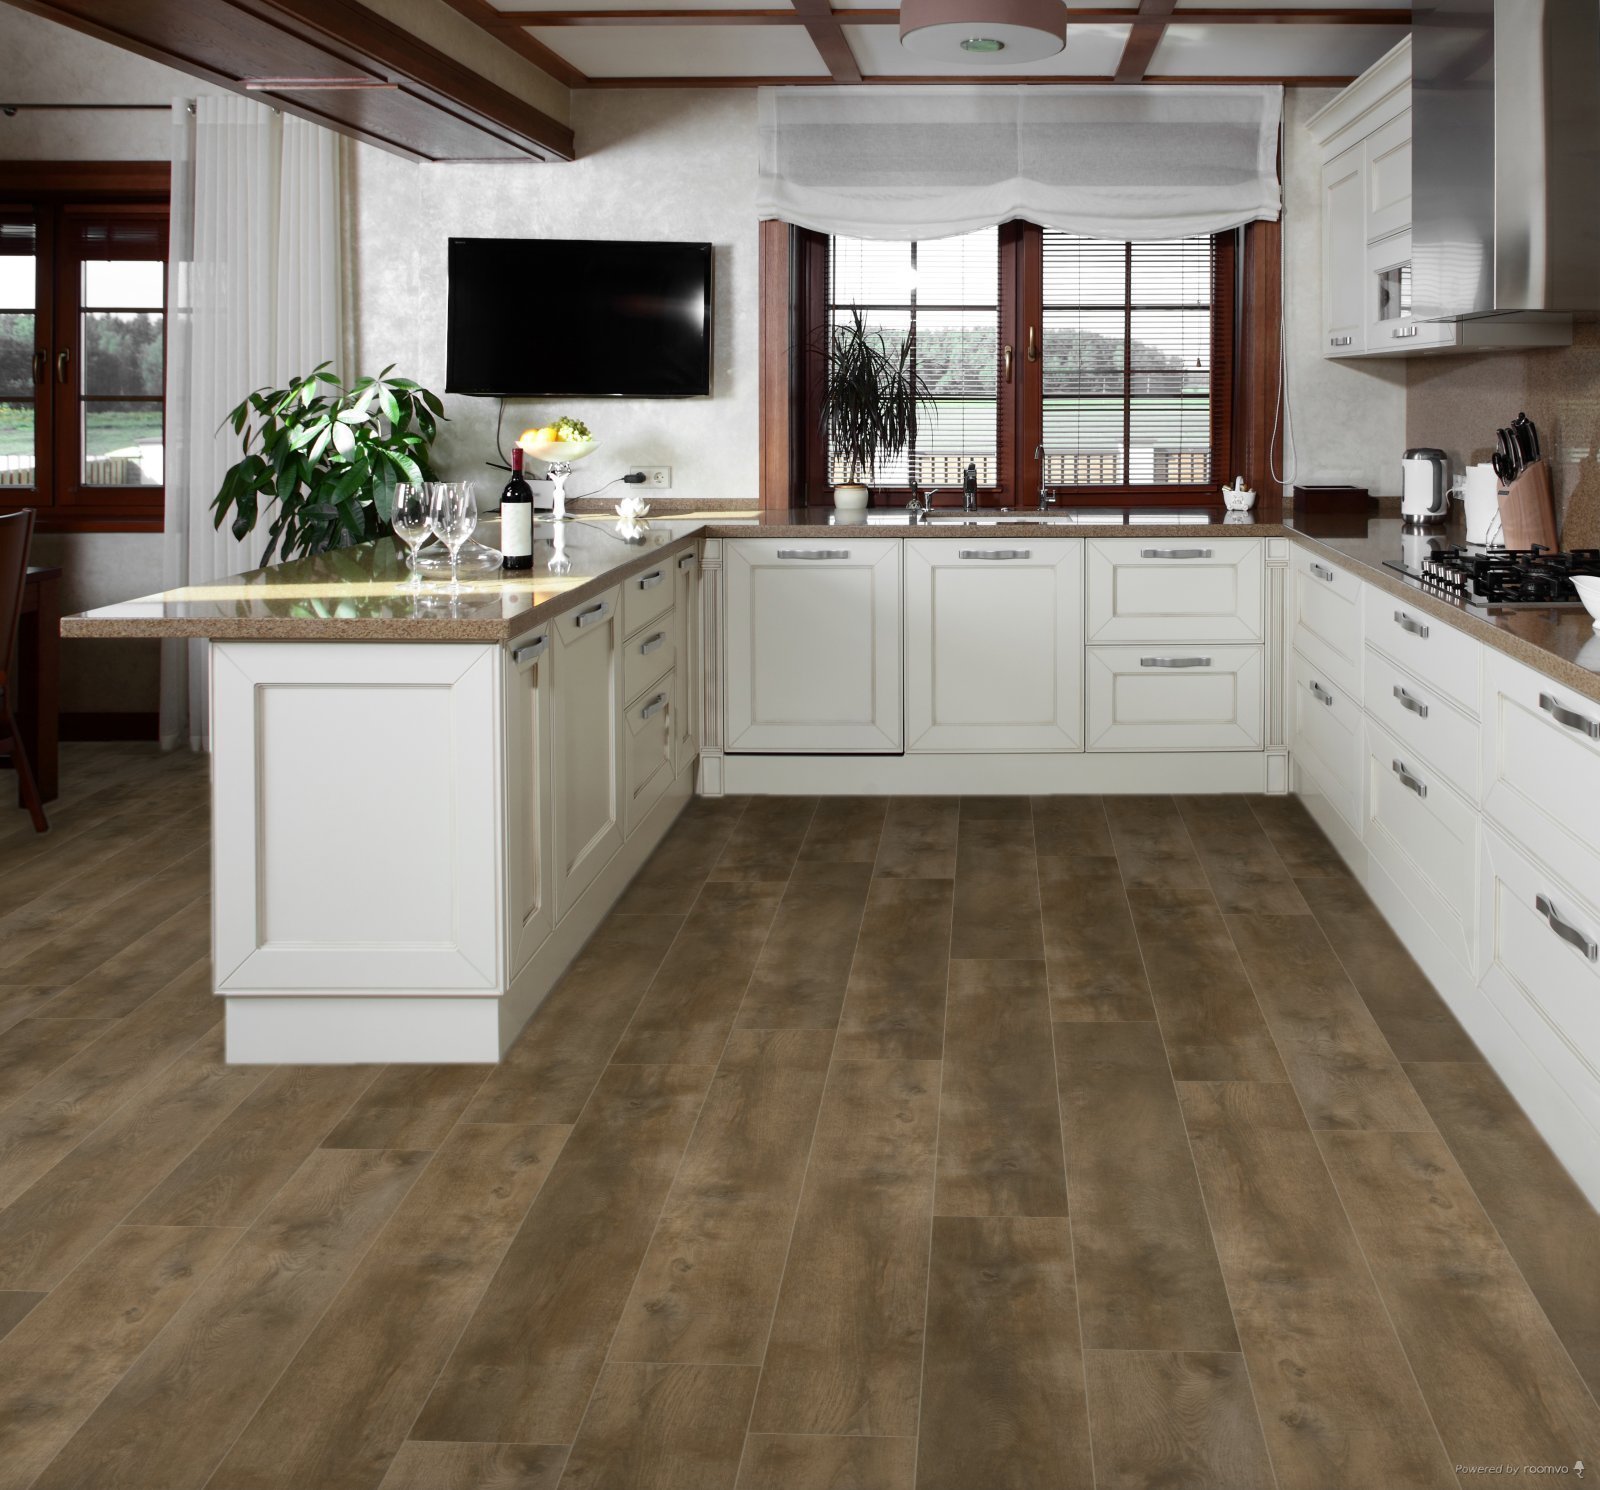 Horizen Flooring presents to you a picture of a quality wide plank Handel luxury vinyl plank. NovoCore Q XXL Tango collection features a wide range of colors & designs that will compliment any interior. Natural wood grain synchronized surface allow for an authentic hardwood look & feel. This collection features a 0.3″ / 7.5 mm overall thickness and a durable 22 mil / 0.55 mm wear layer for residential and commercial applications.